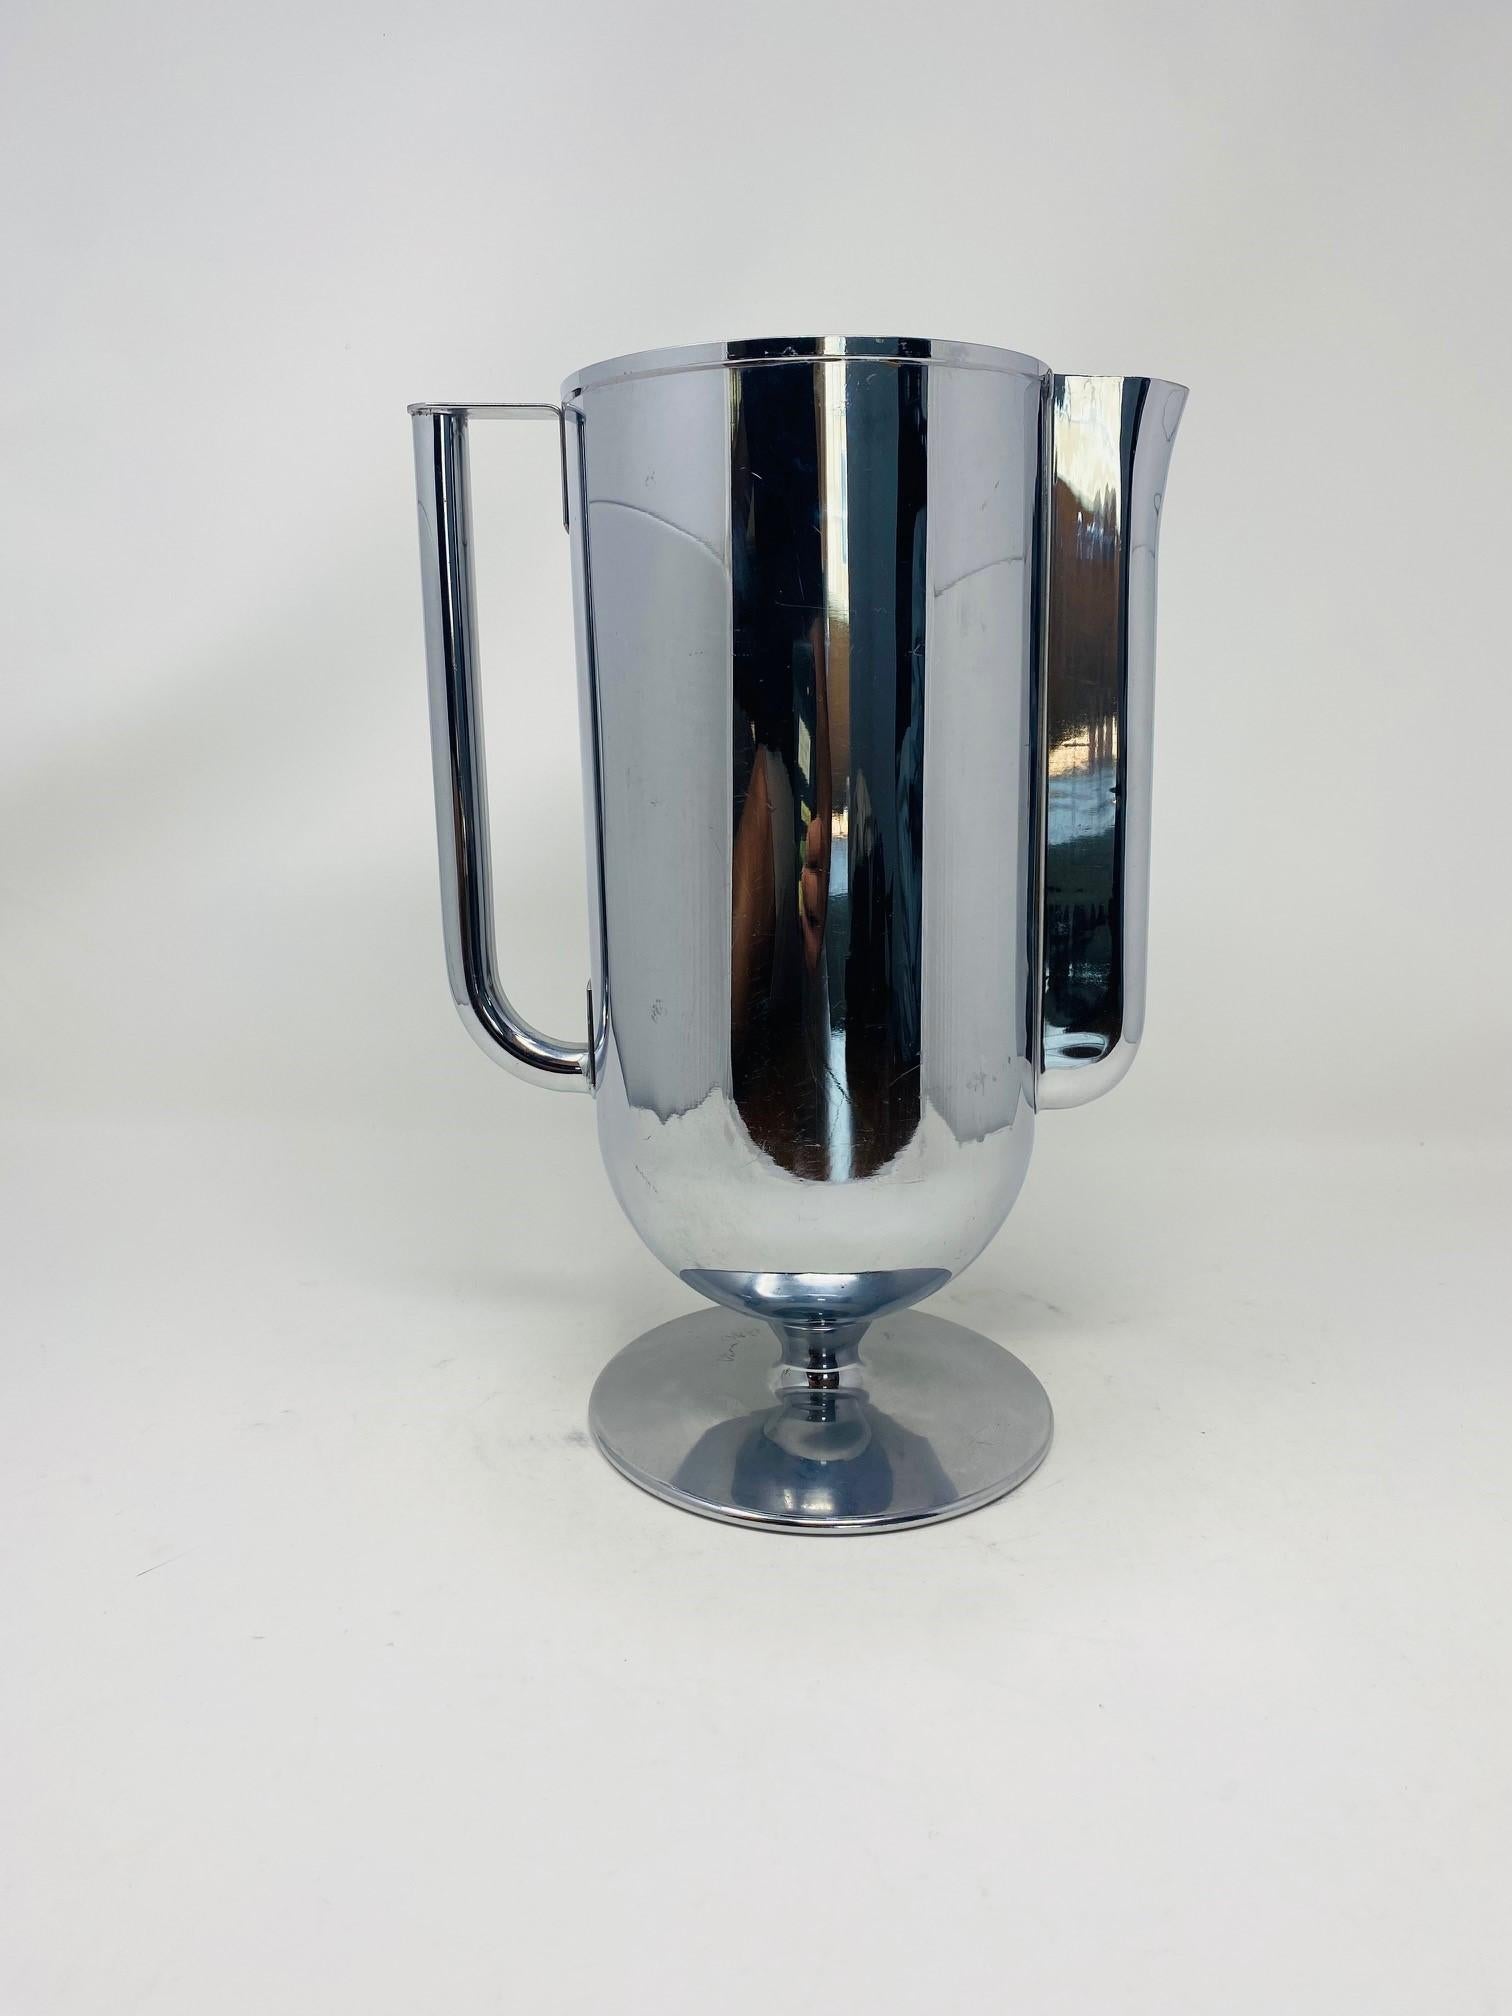 Beautiful art deco chrome pitcher by Norman Bel Geddes.  This beautiful pitcher will bring light and attention to your bar.  Constructed seamlessly and beautifully, this piece elevates your bar style and brings a new level of taste.  Minimal and